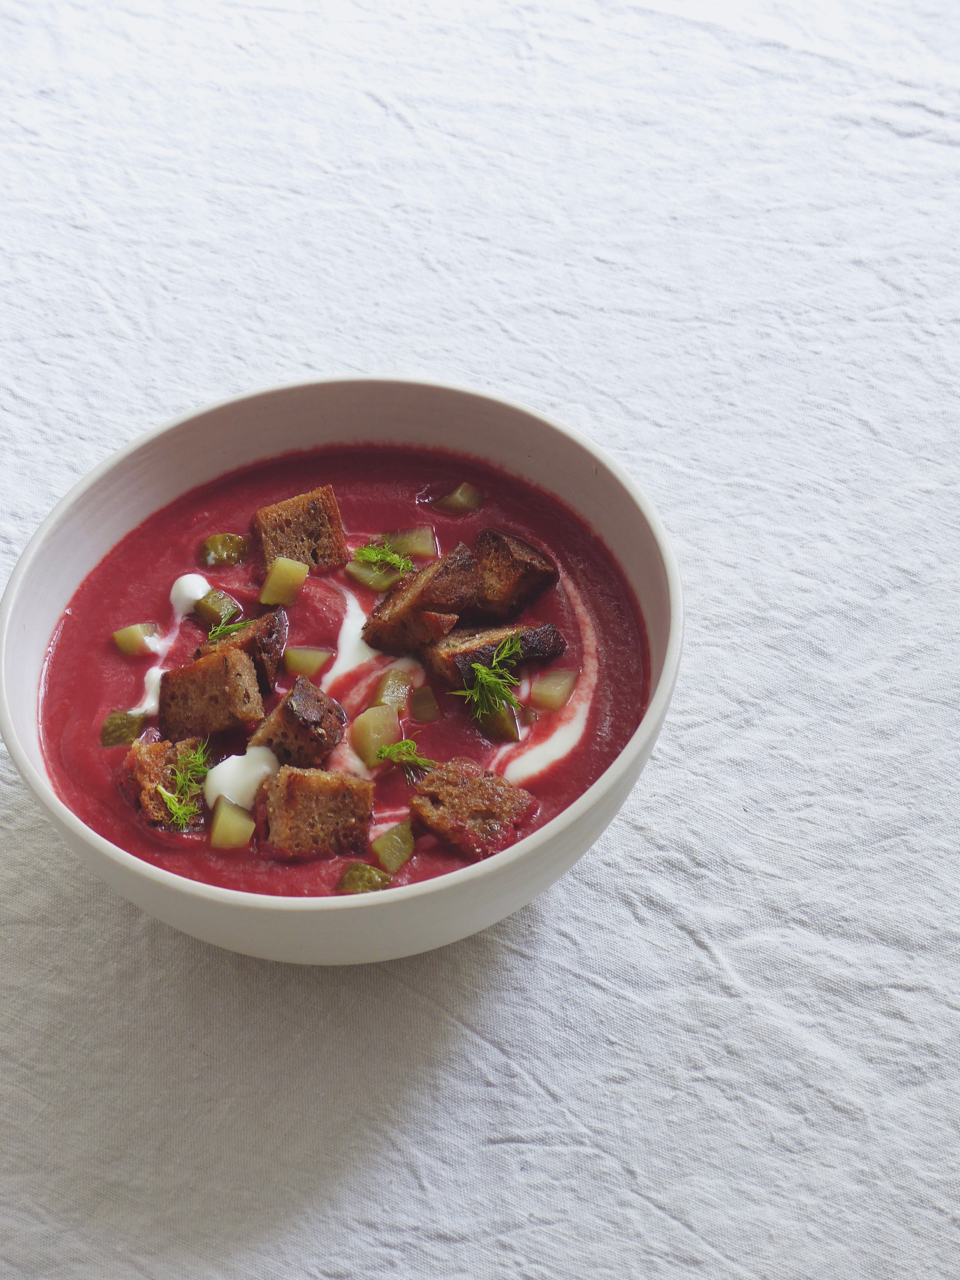 Rote Beete Suppe - Hannes Flade